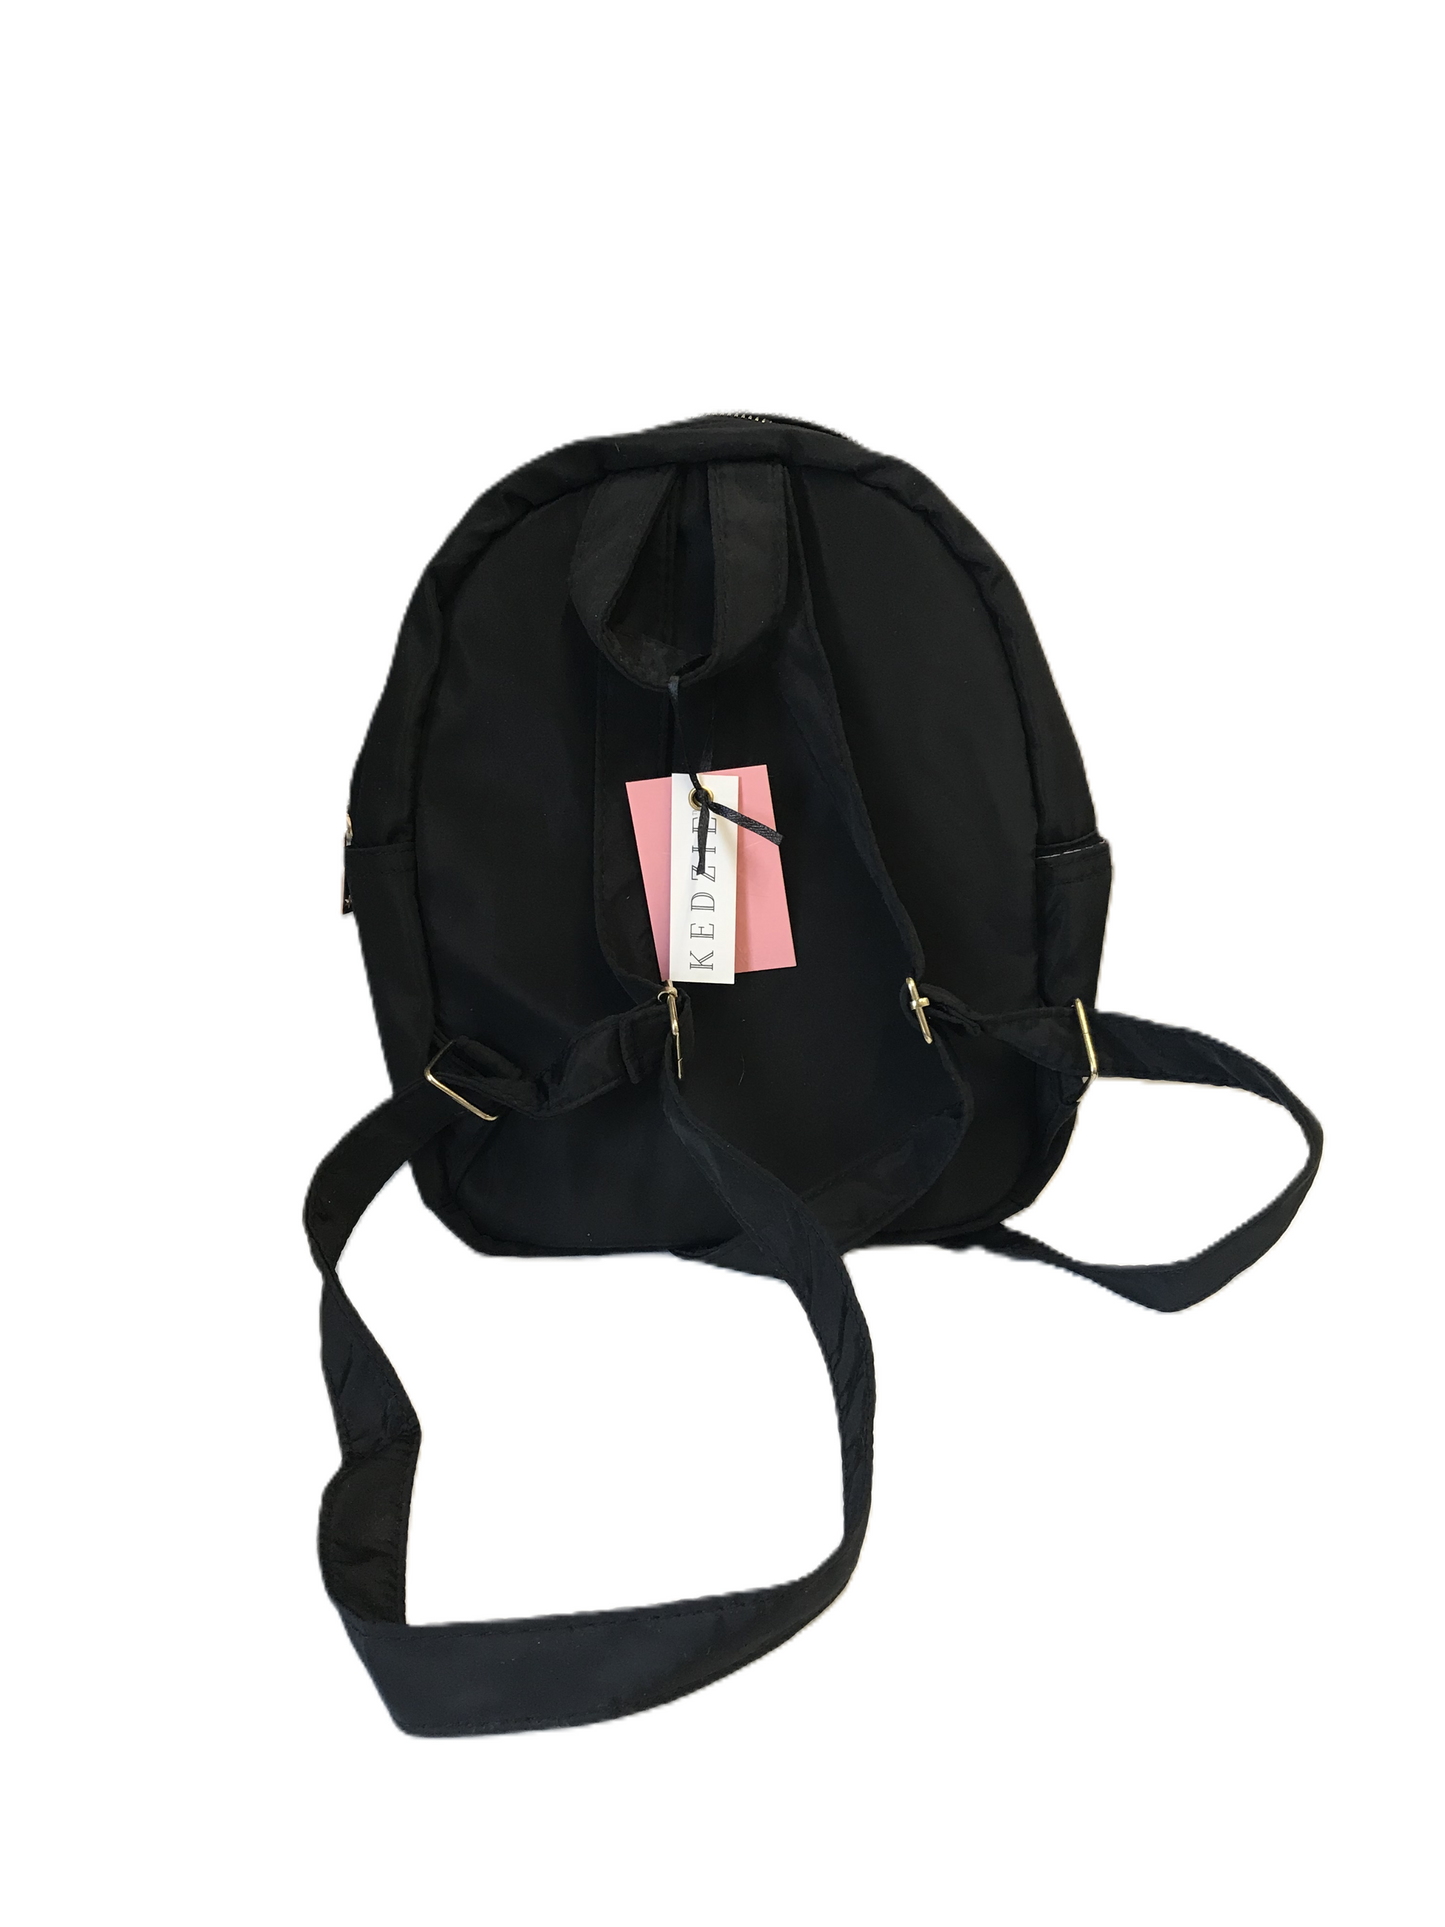 Backpack By Kedzie Size: Small